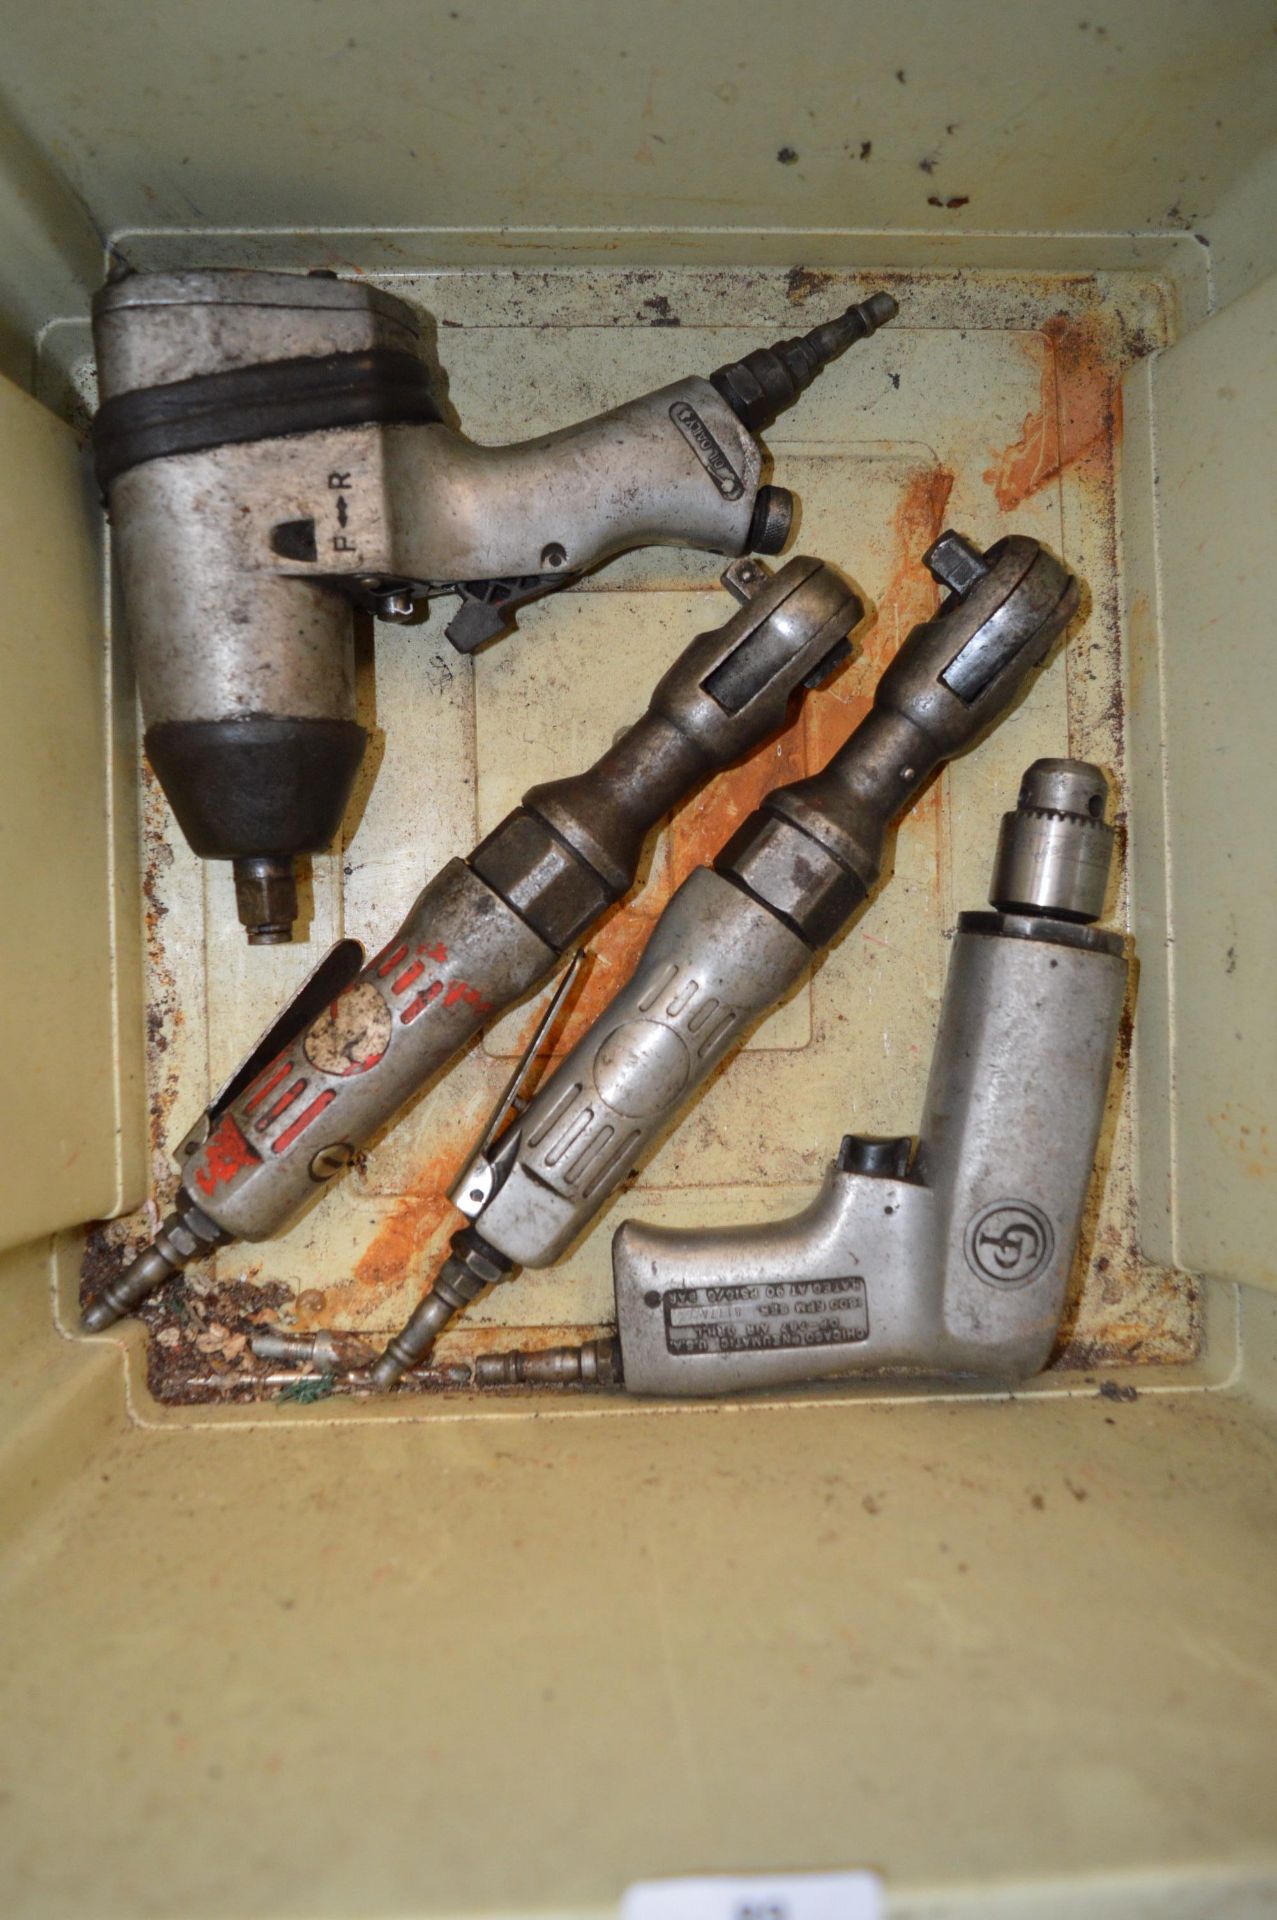 Pneumatic Tools Including Impact Gun, Drill, ½” and ¾” Drive Side Ratchet